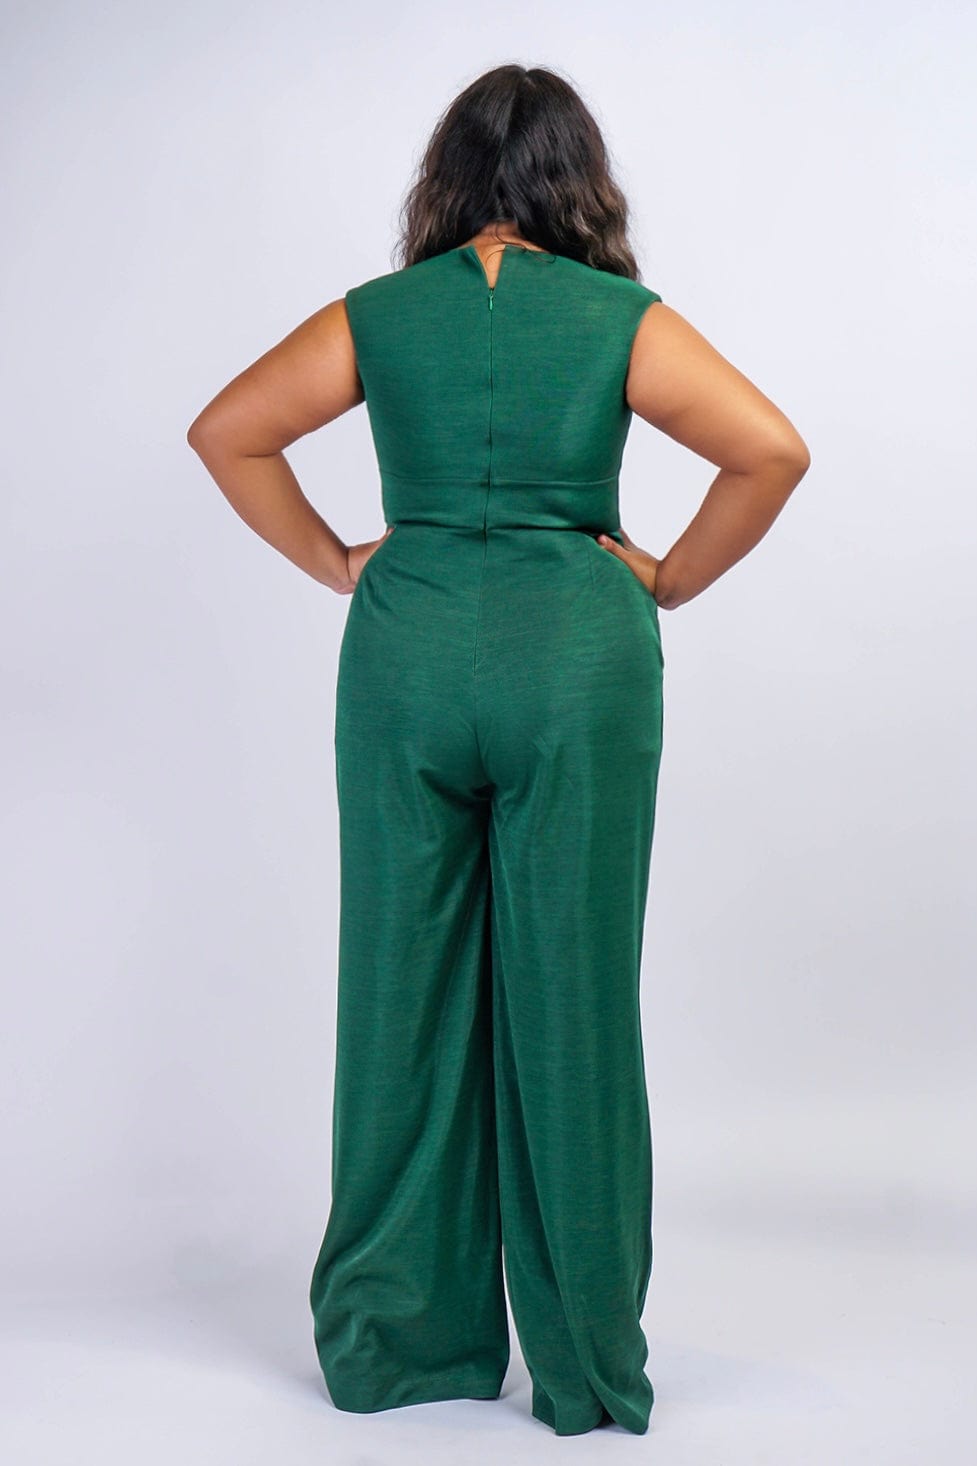 JUMPSUITS &amp; ROMPERS Emerald Luxe Sheen V Neck Aiden Jumpsuit - Chloe Dao